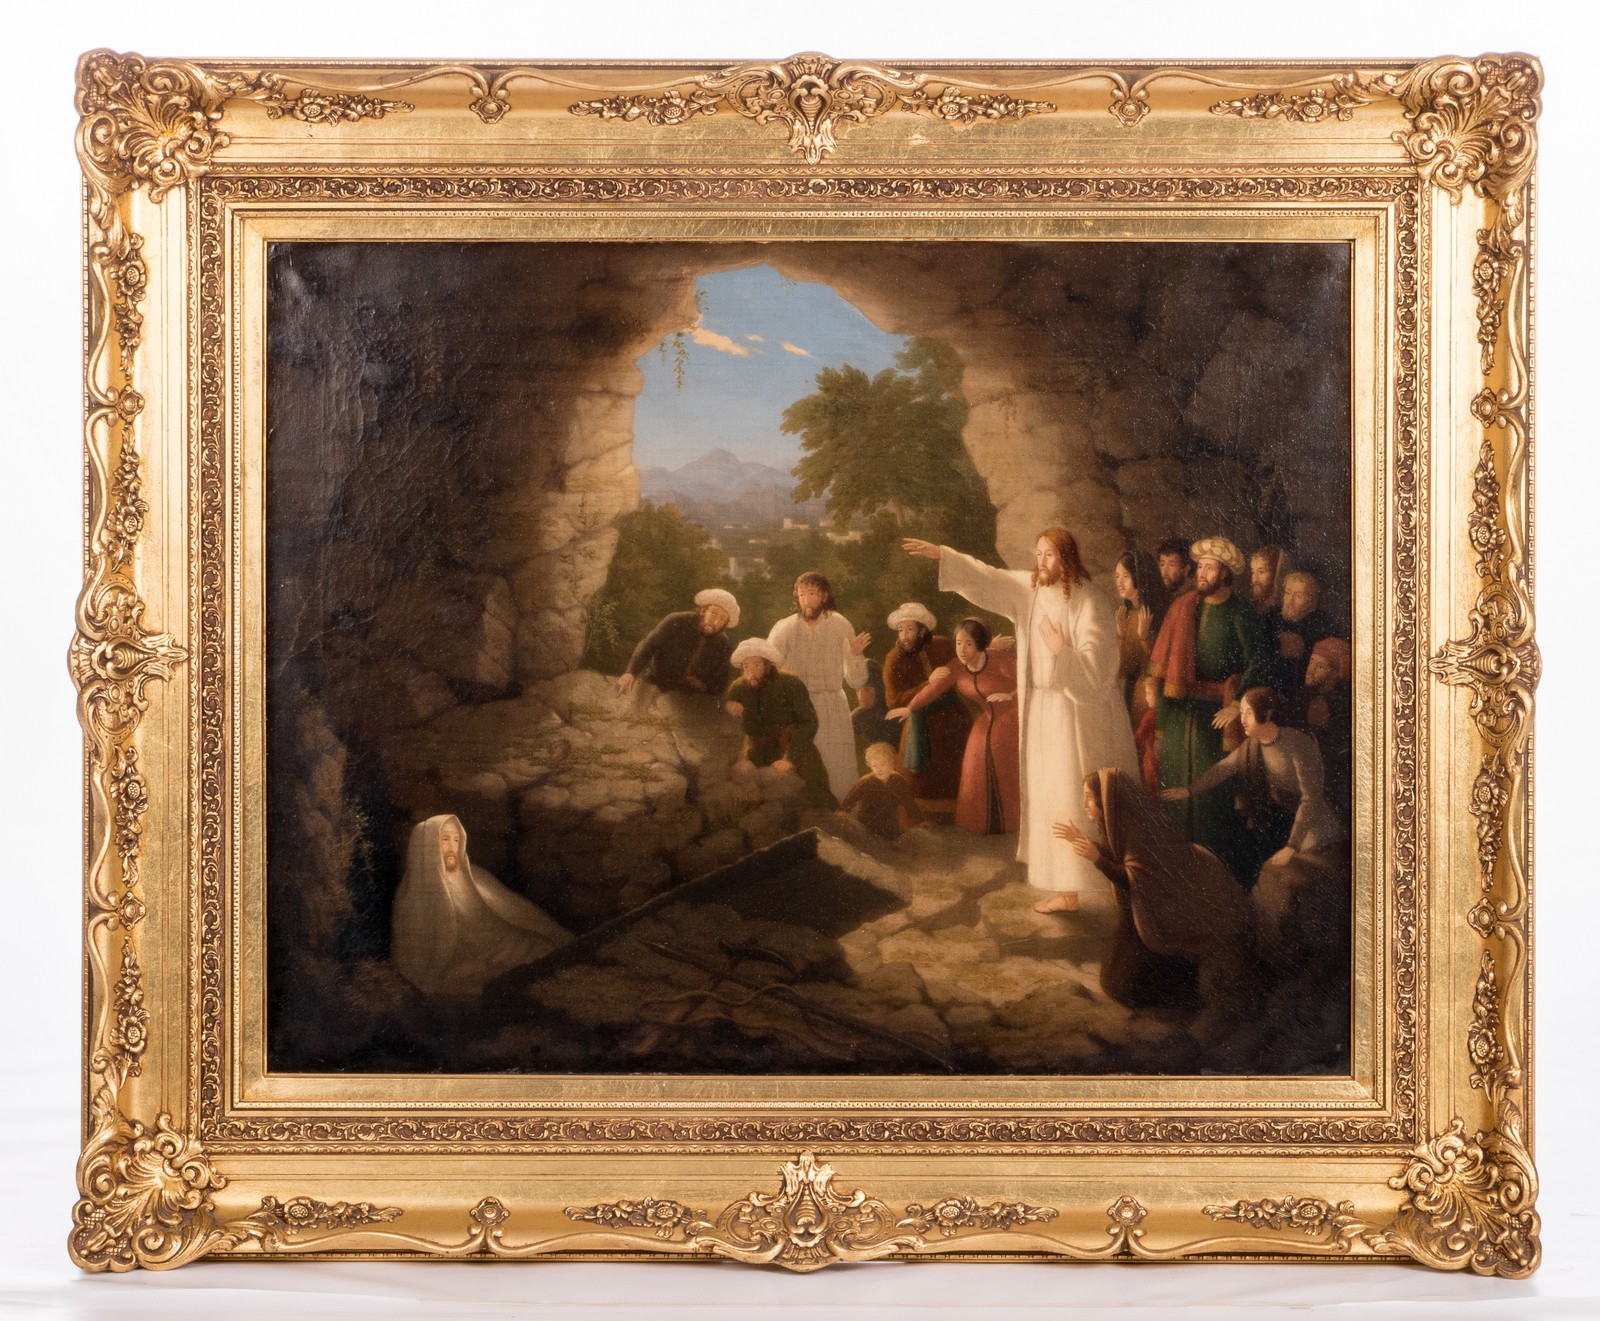 Unsigned, the raising of Lazarus, oil on canvas, second half 19thC, 66 x 86 cm - Image 2 of 7